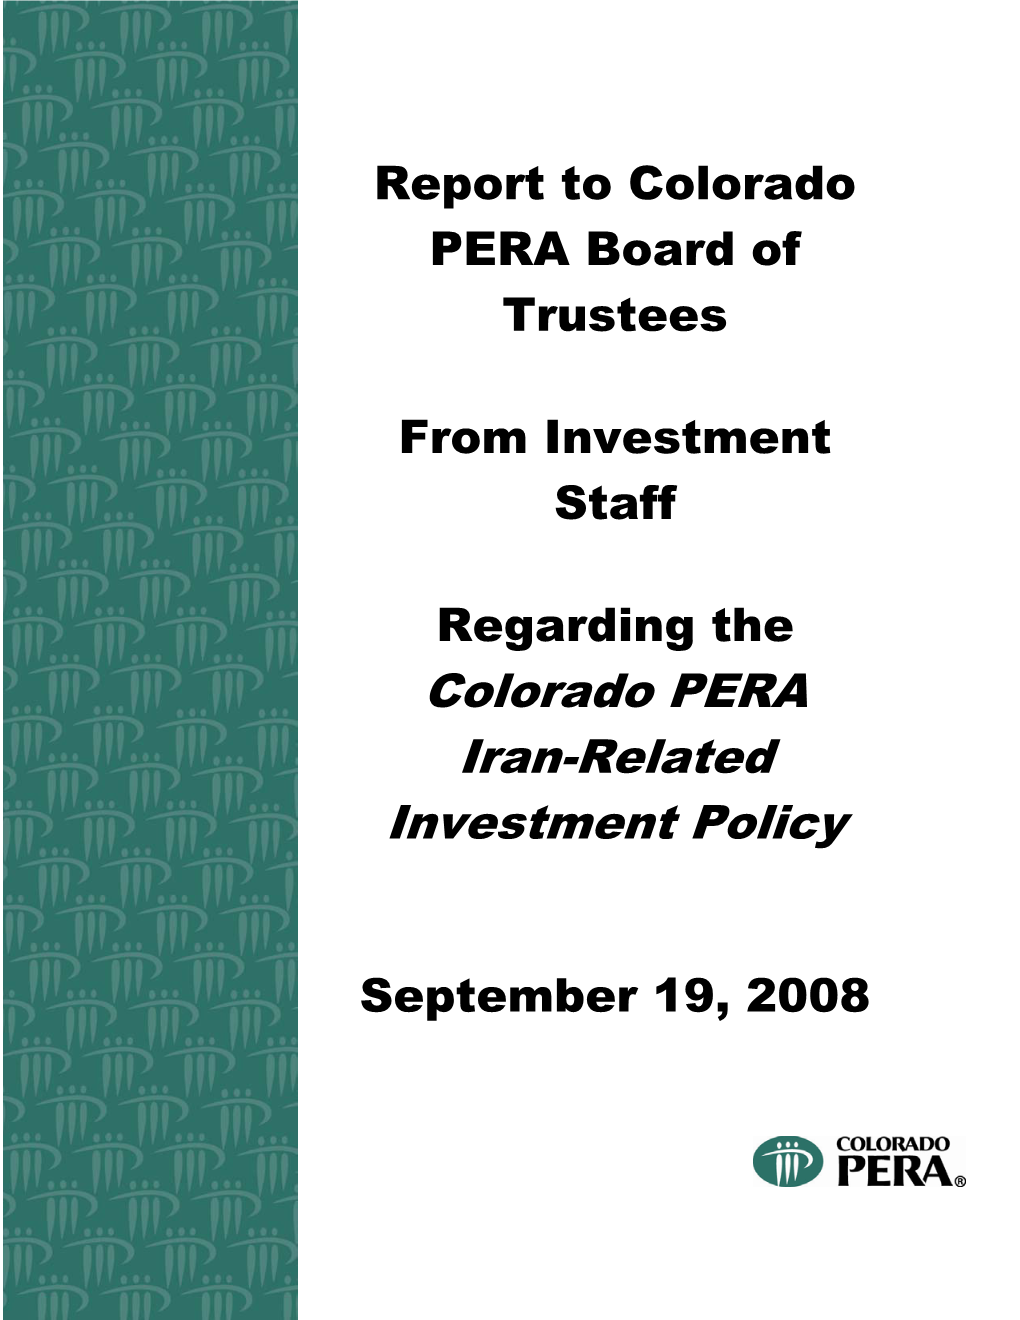 Colorado PERA Iran-Related Investment Policy